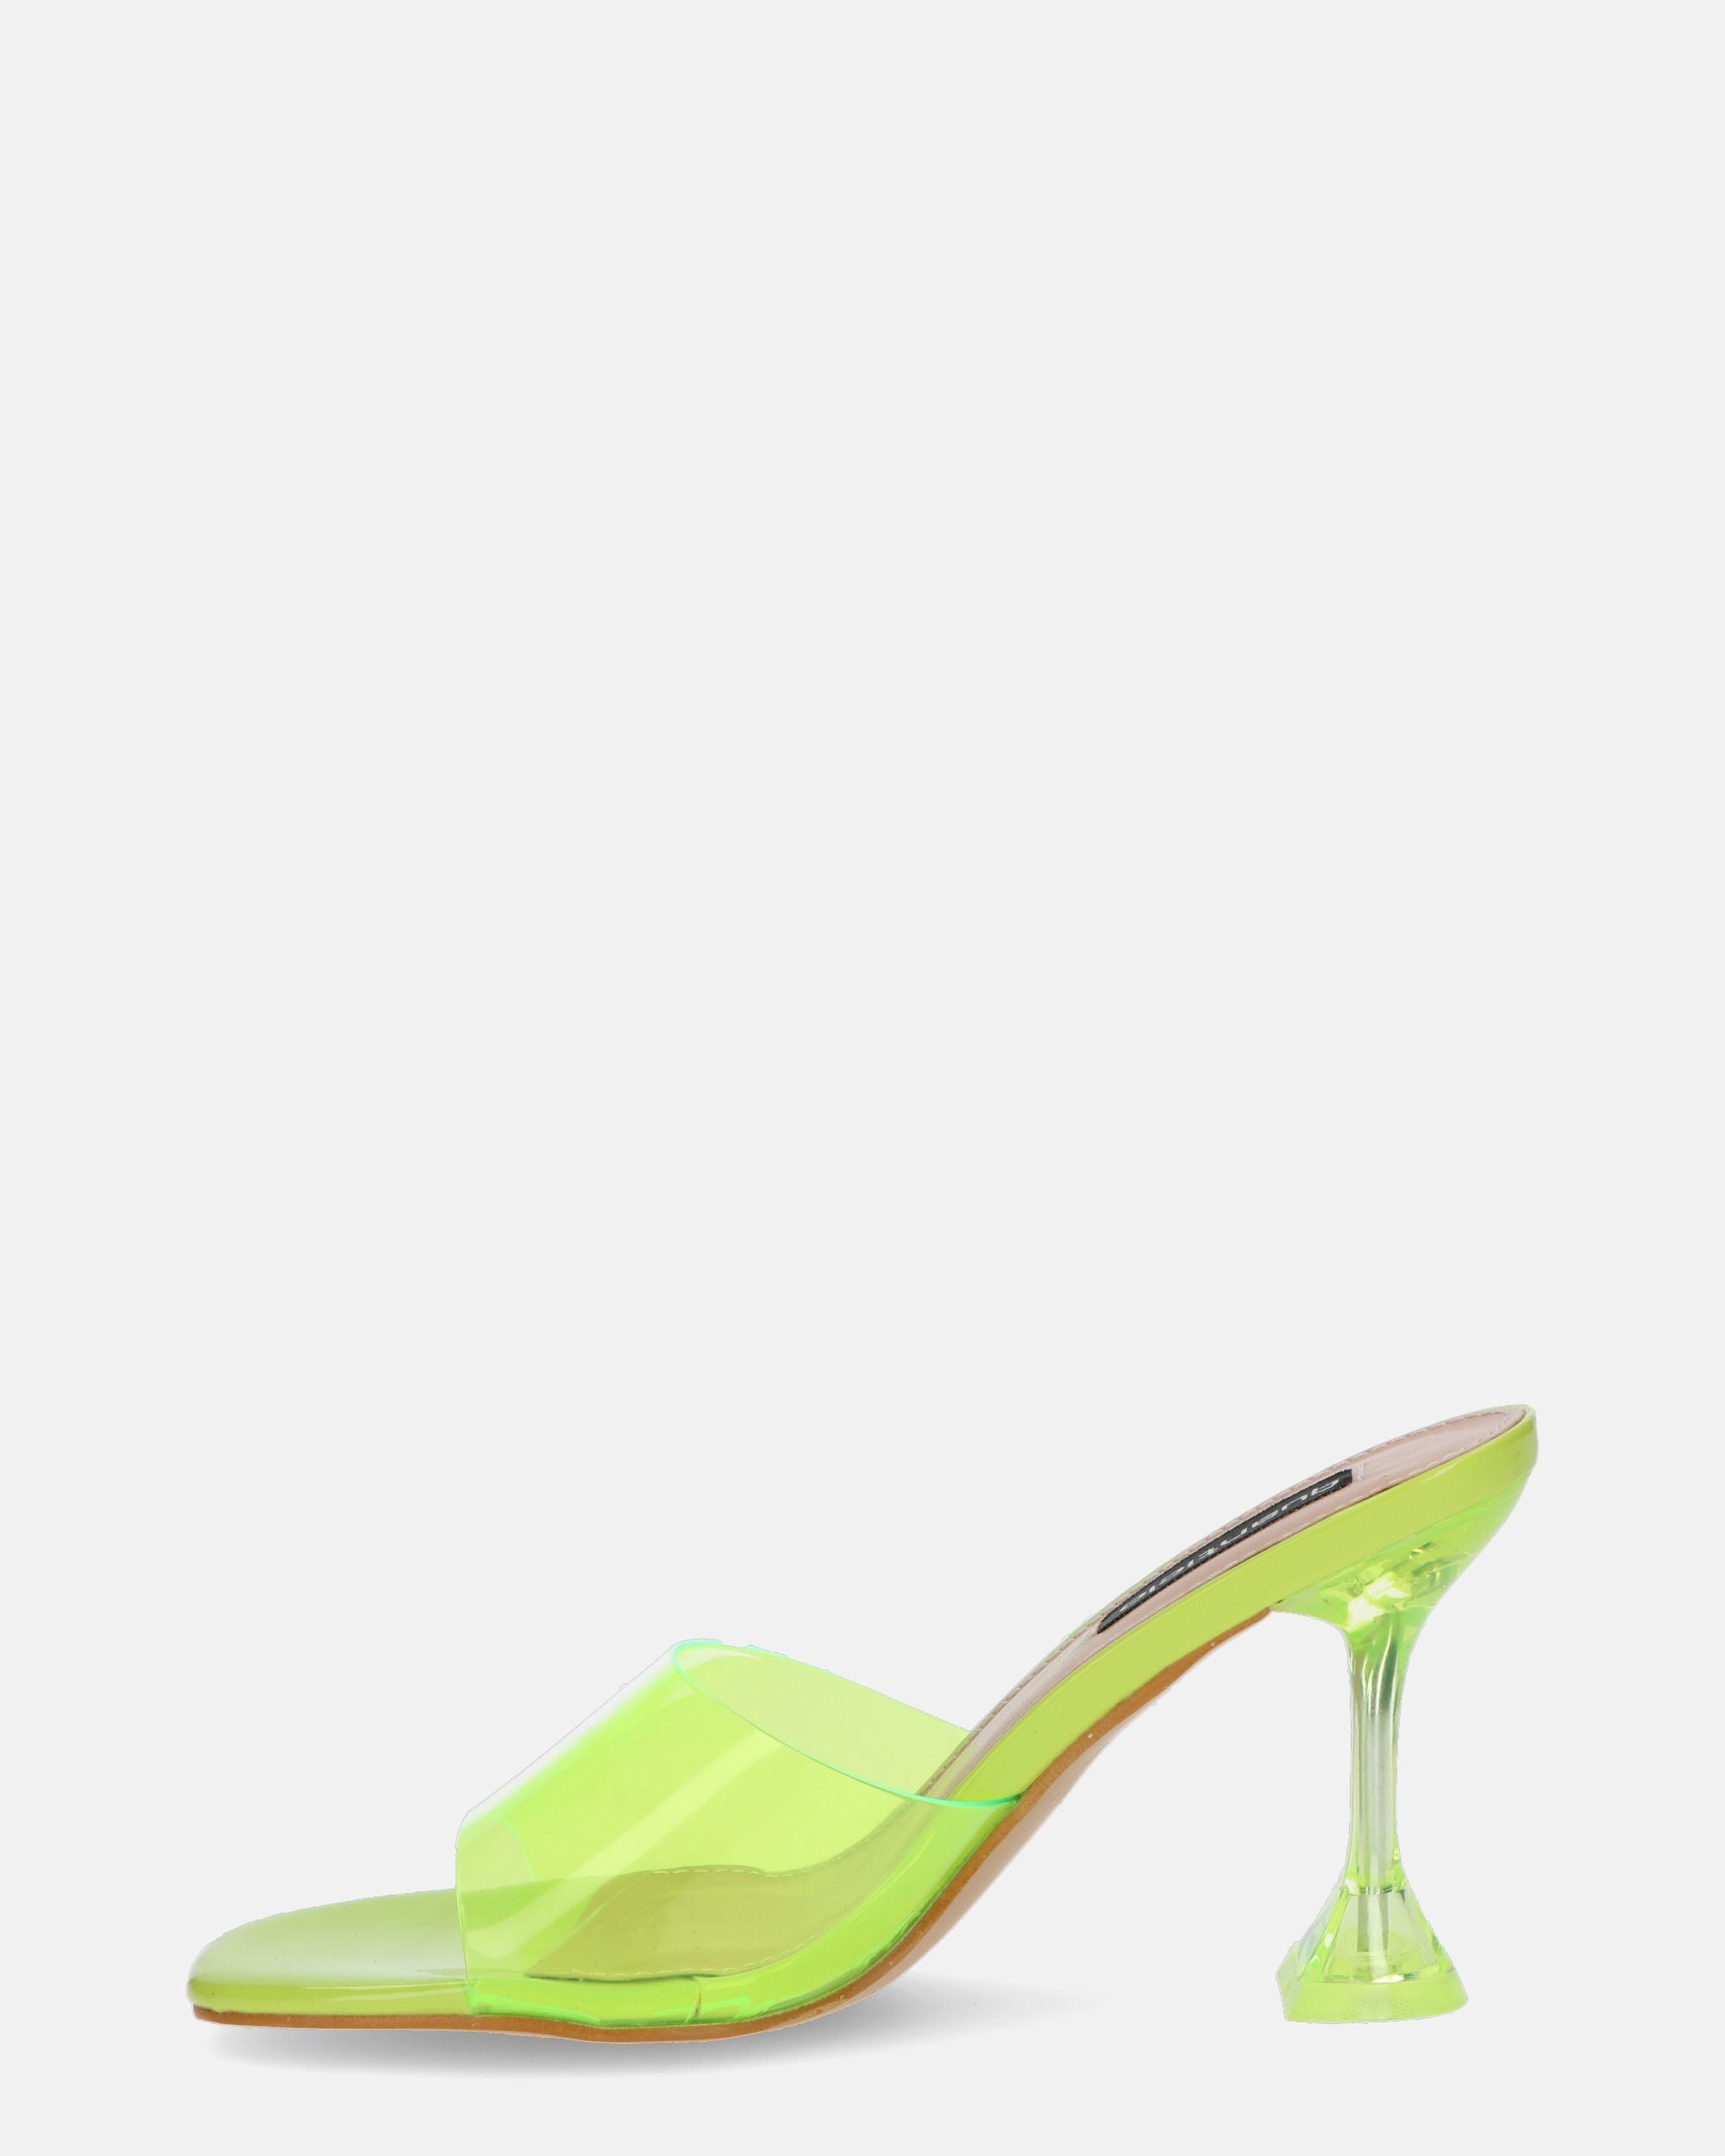 FIAMMA - yellow perspex heeled sandal with PU sole